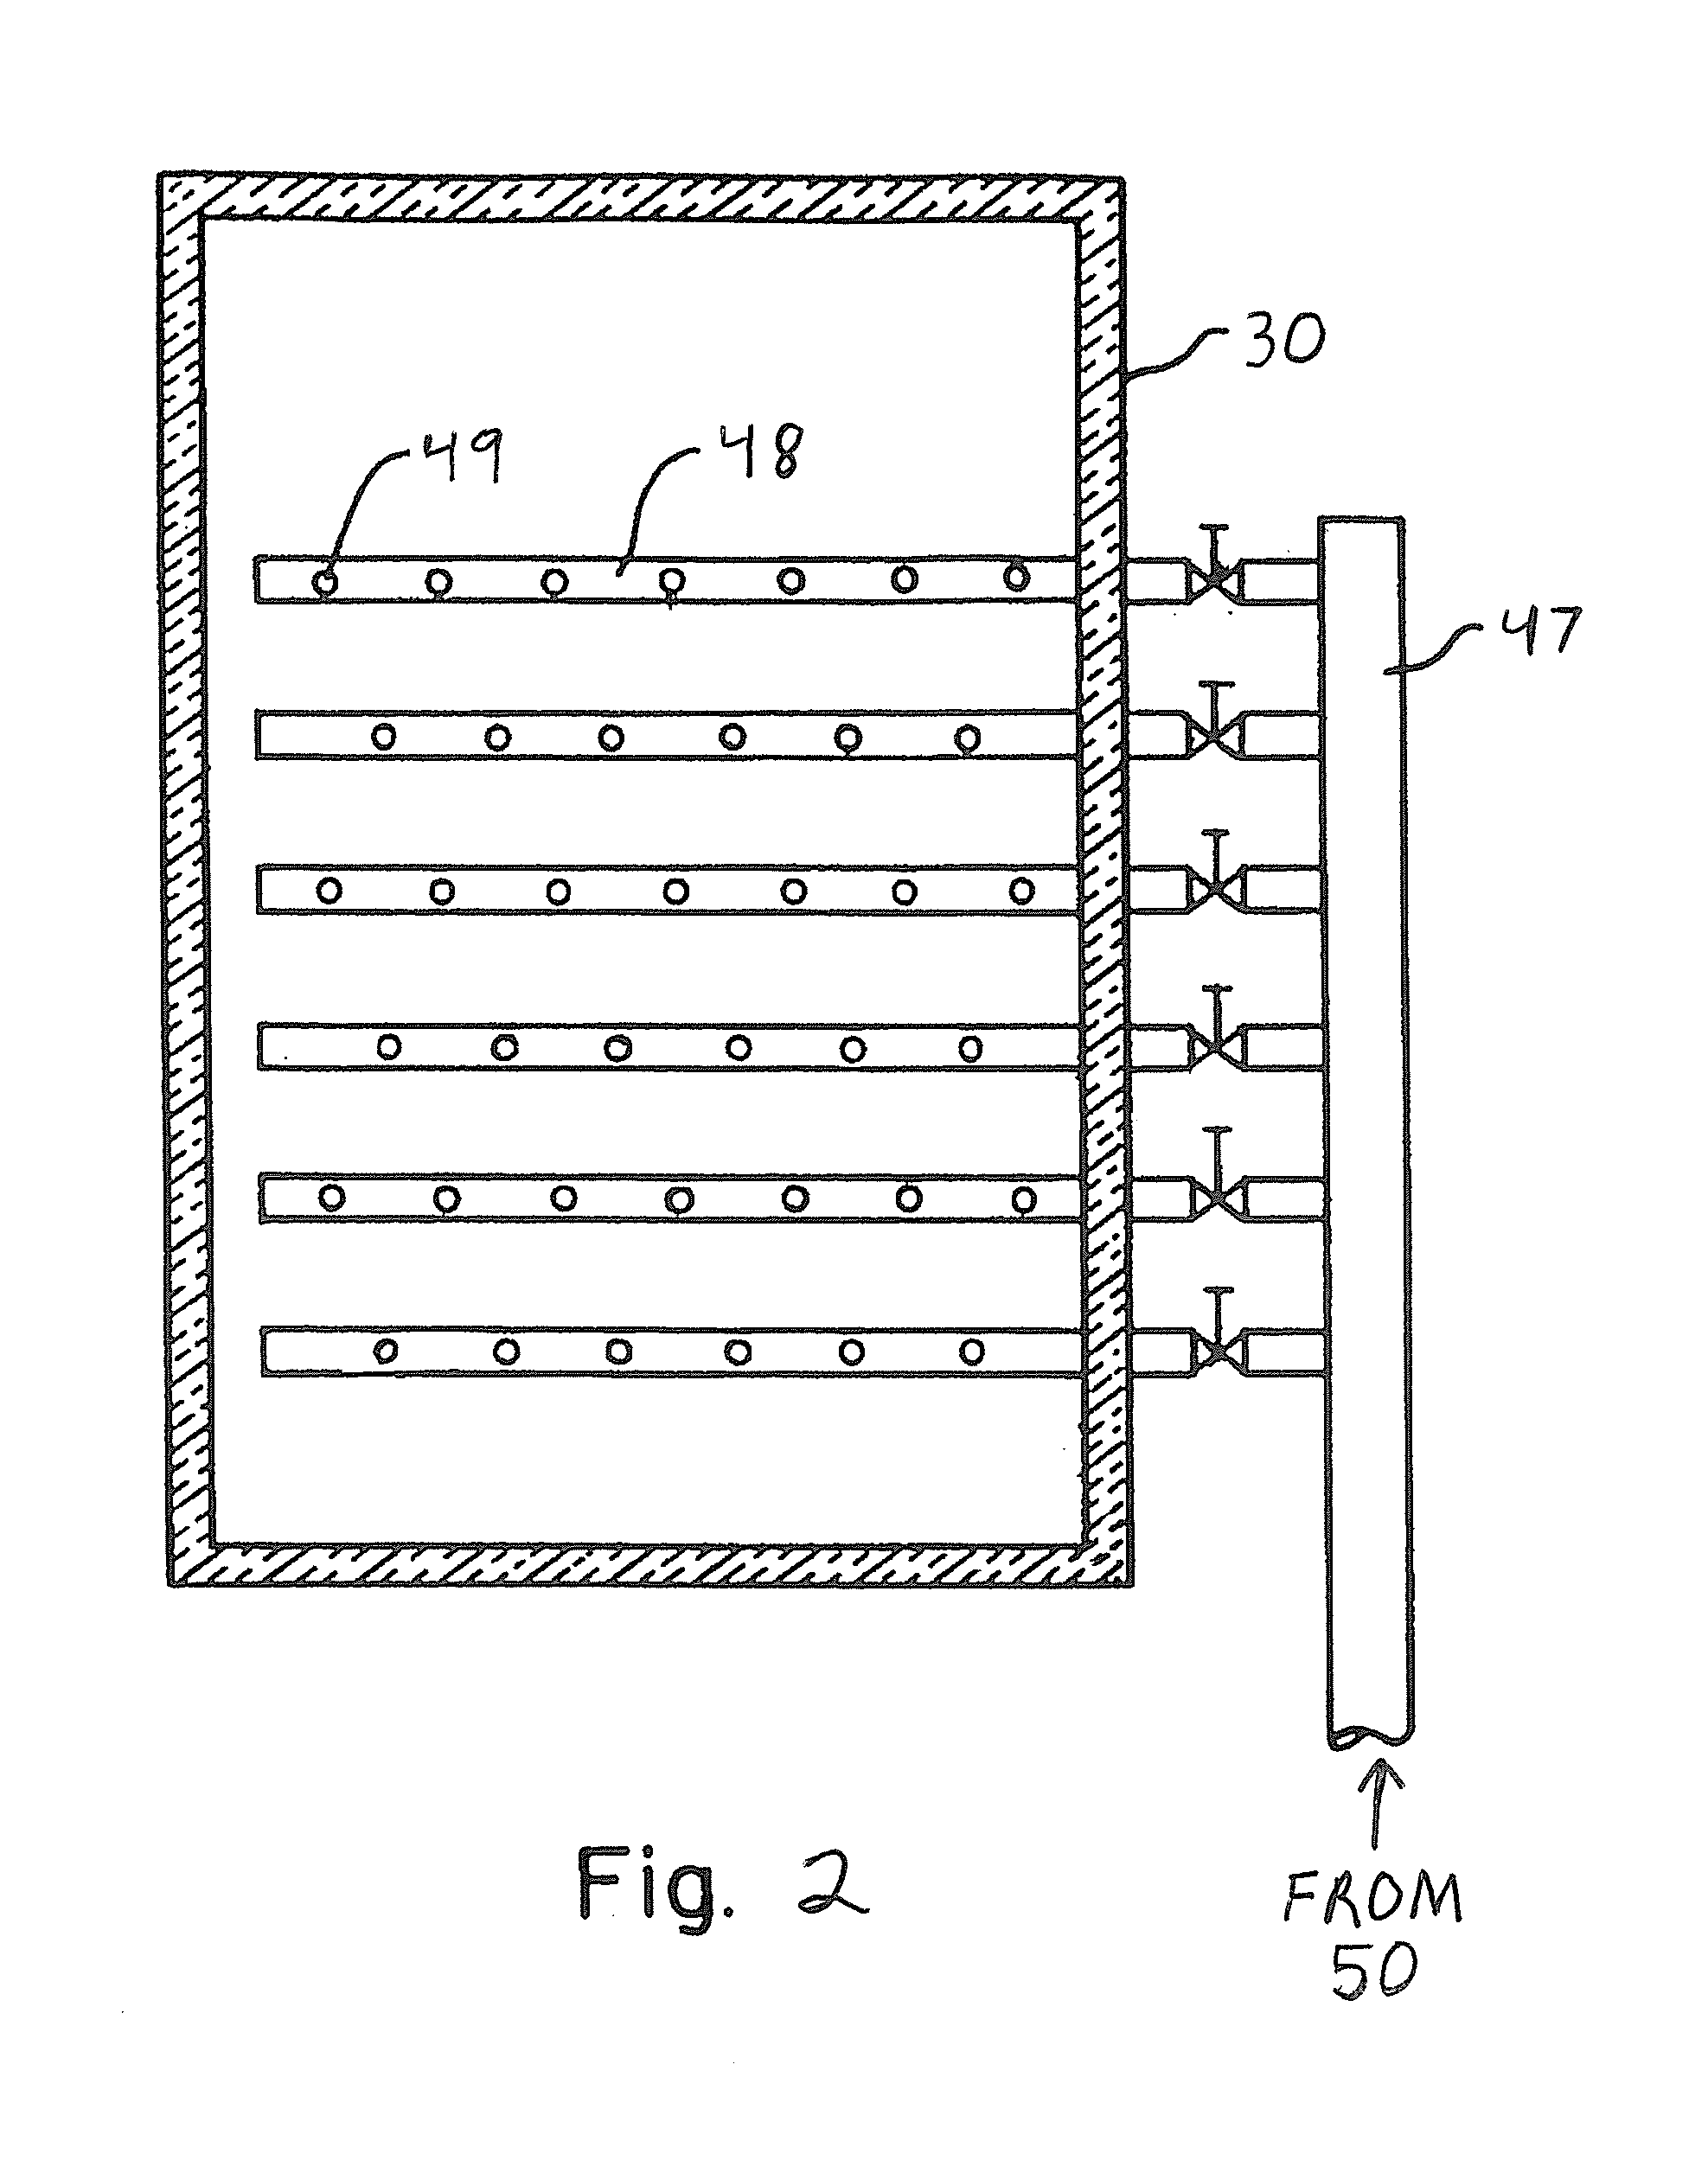 System and method for urea decomposition to ammonia in a side stream for selective catalytic reduction